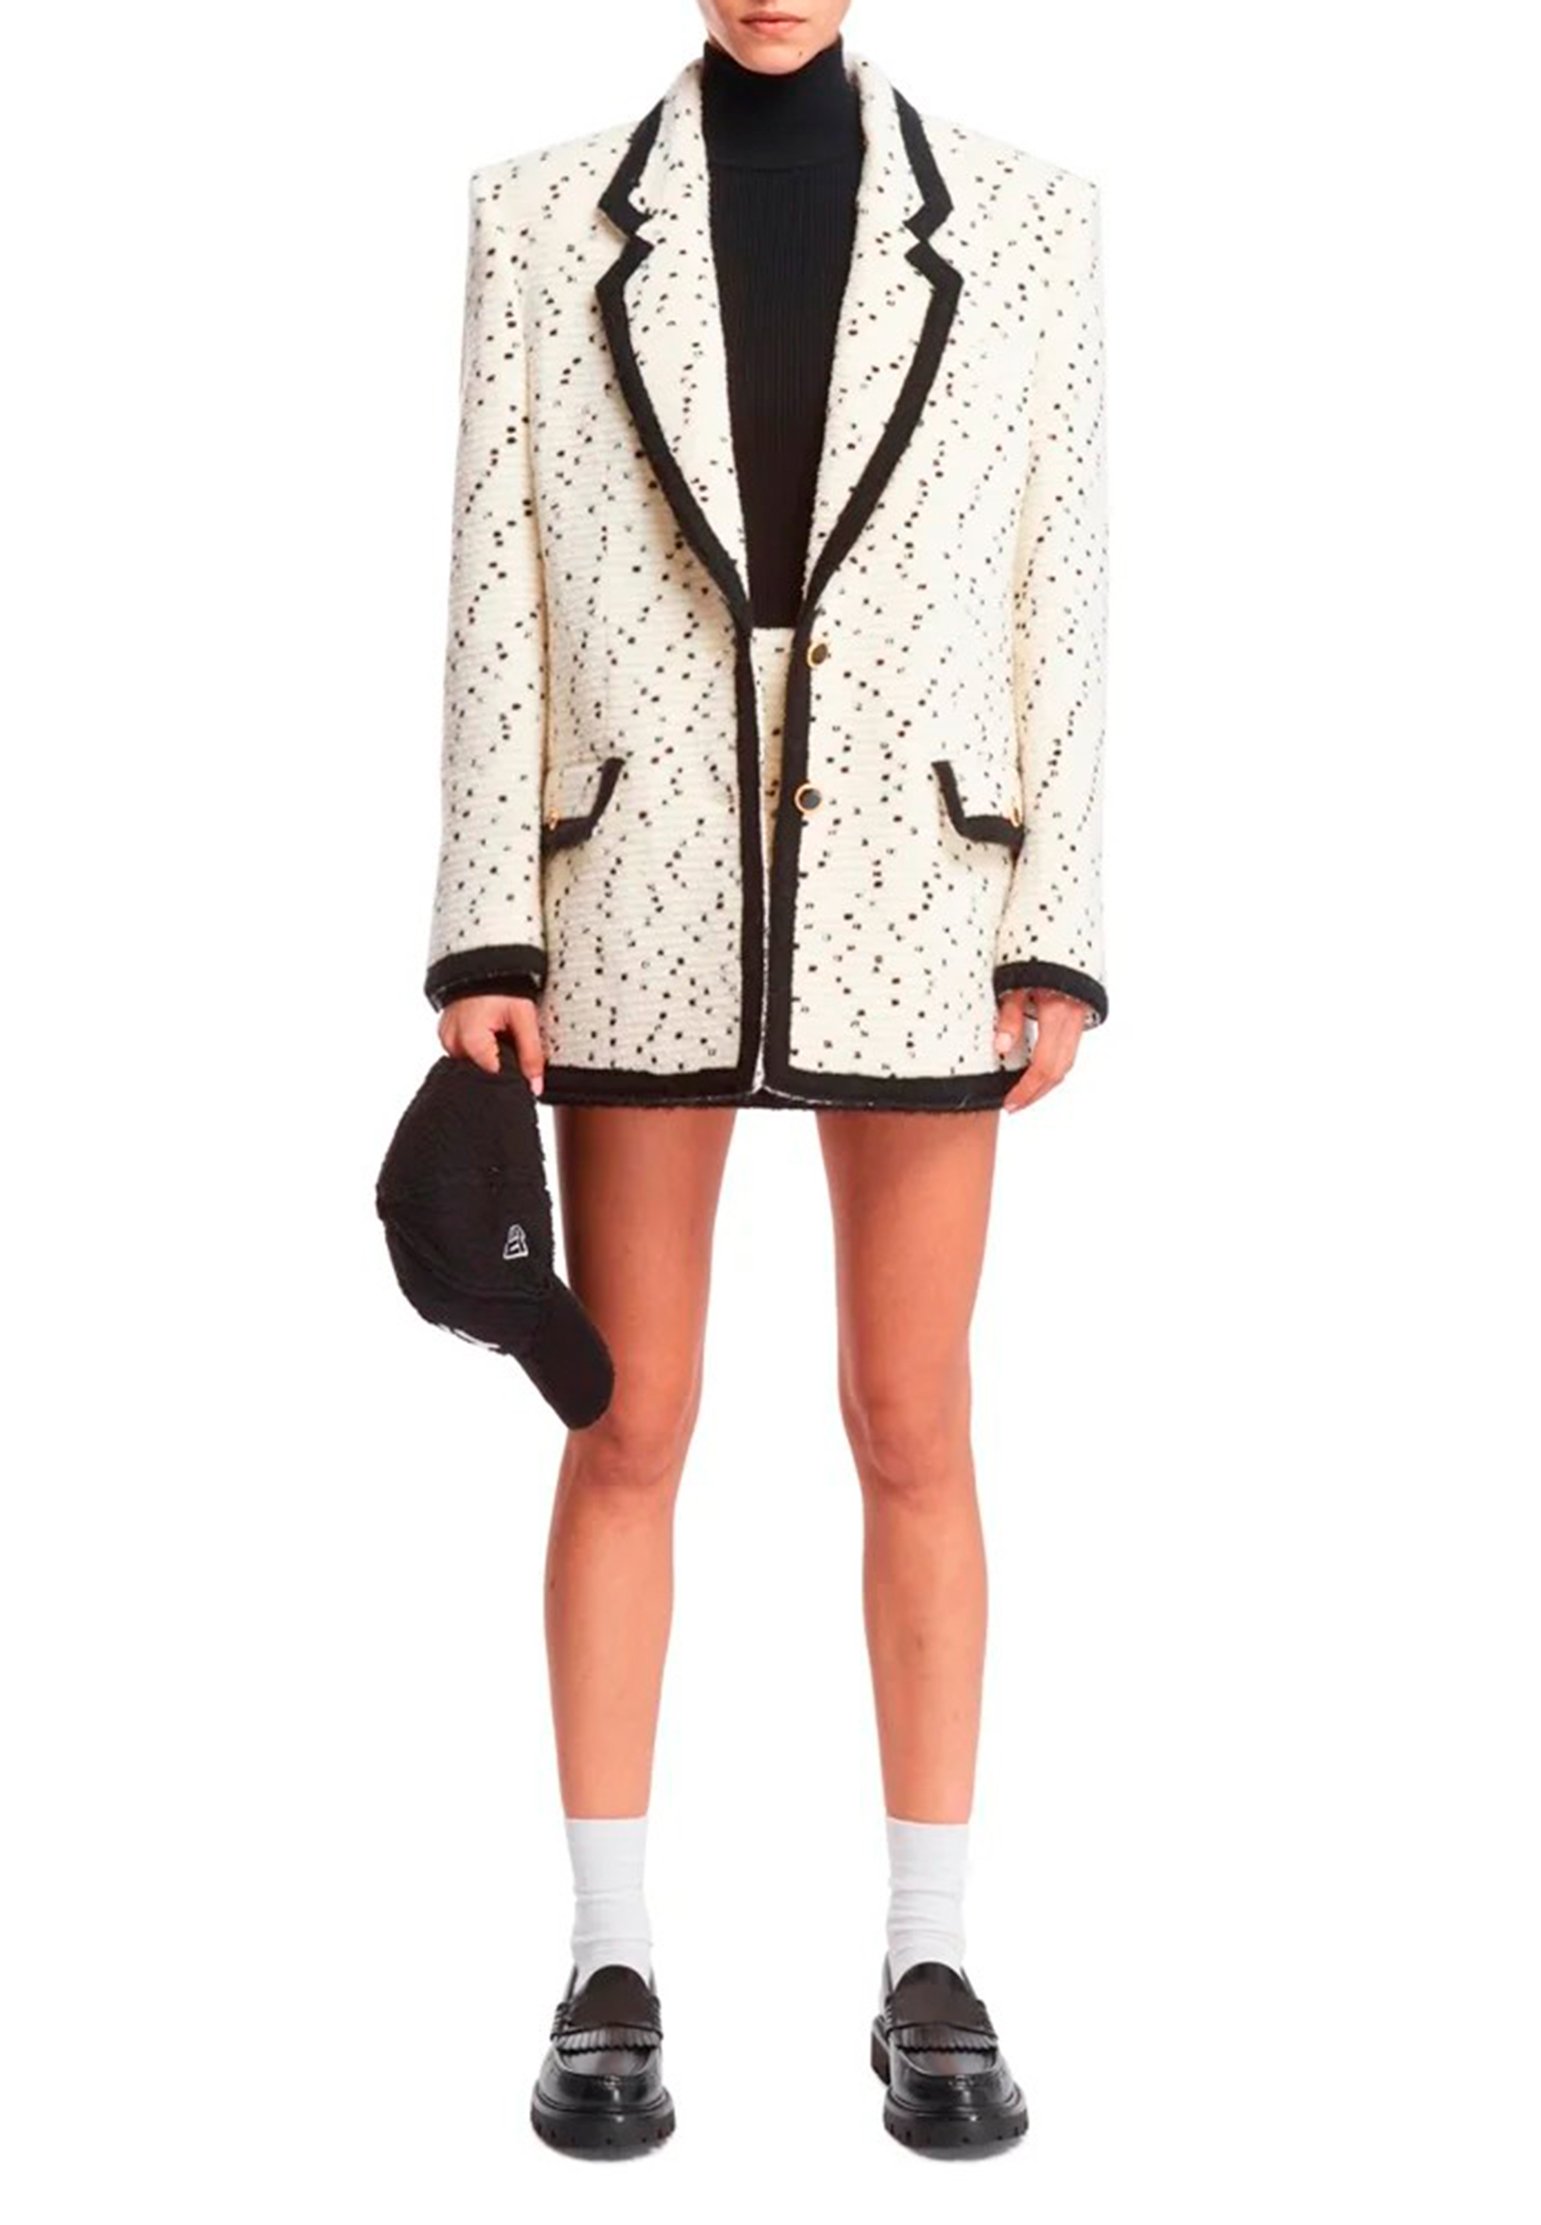 Jacket ALESSANDRA RICH Color: ivory (Code: 2657) in online store Allure